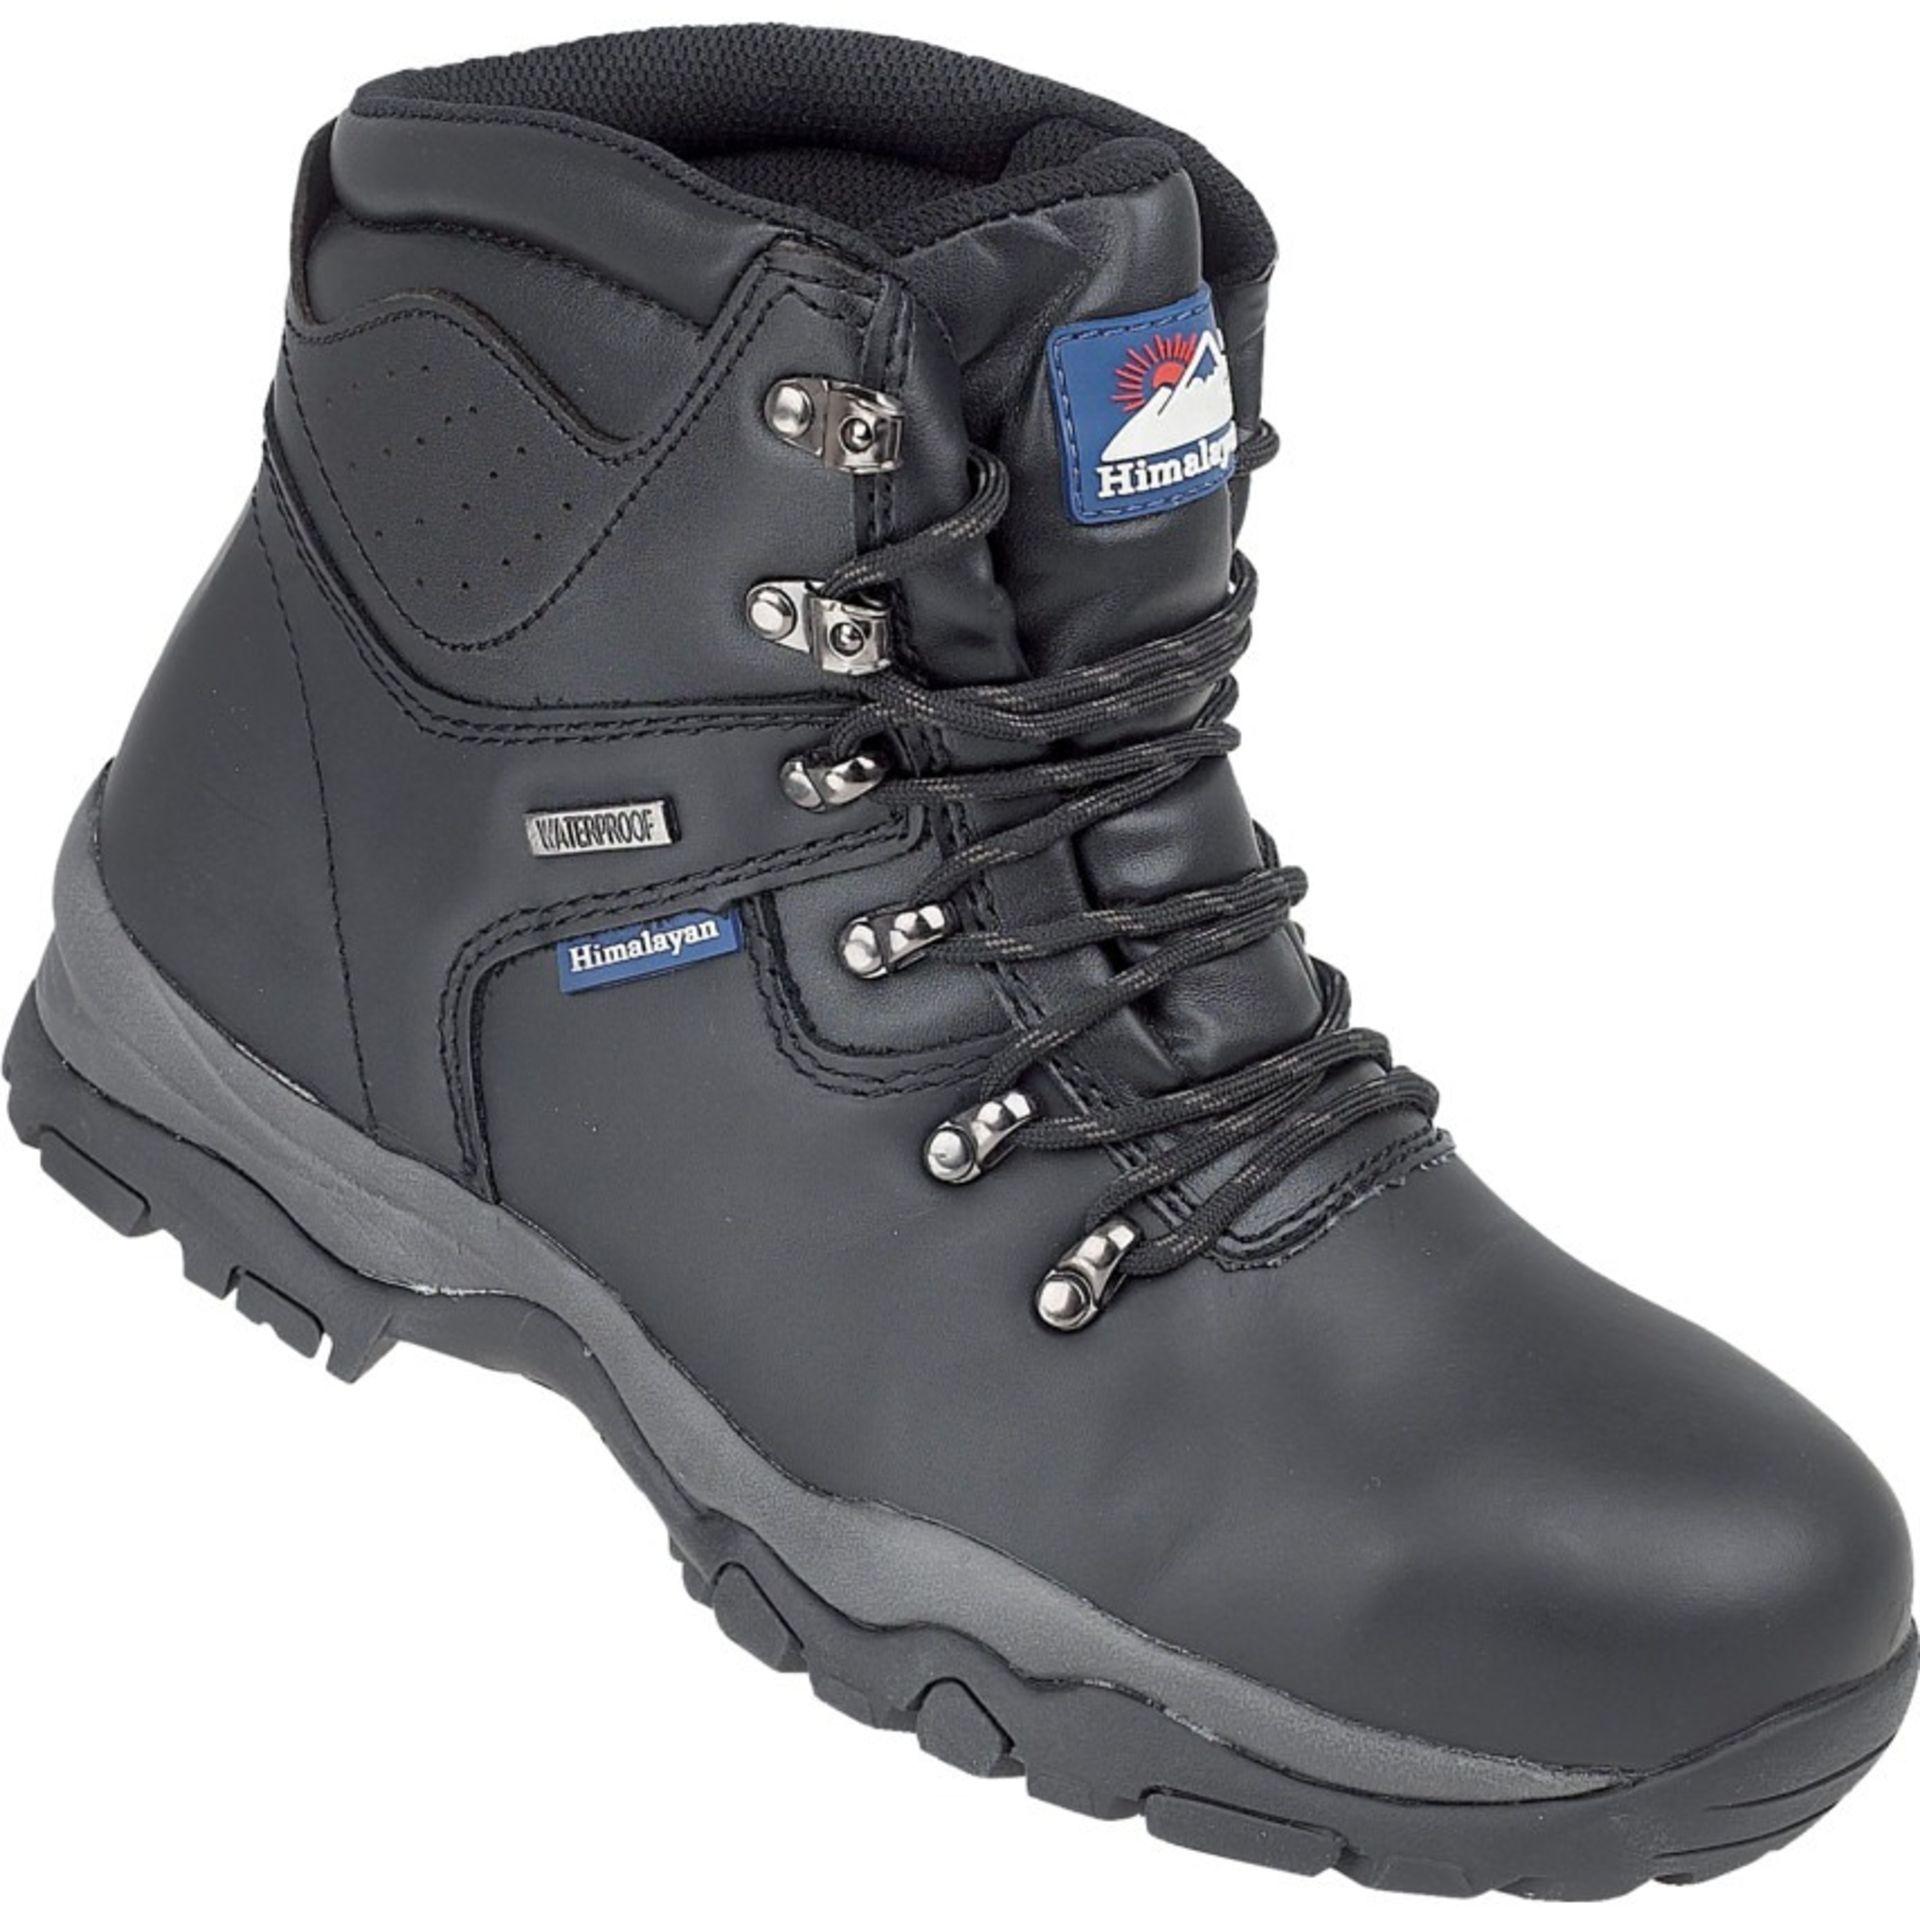 Himalayan 5200 - 9.0 Leather Waterproof Safety Boot, Size 9, Black - ER51